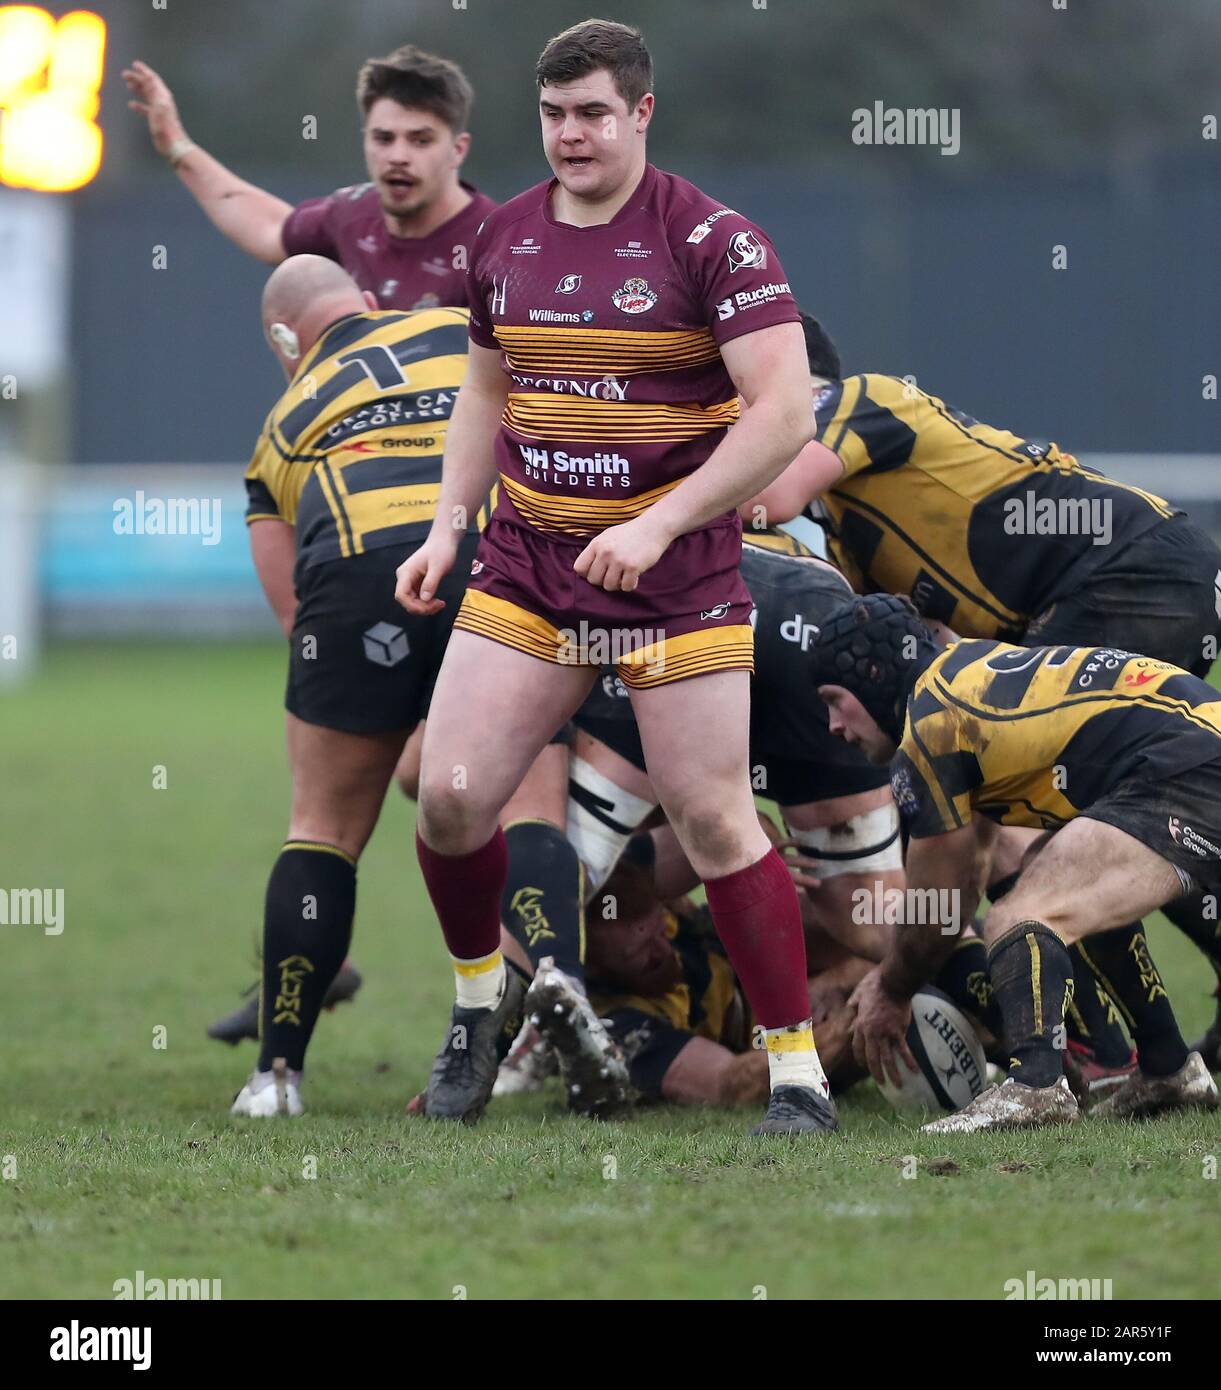 25.01.2020, Hinckley, Leicester, England. Rugby Union, Hinckley rfc v Sedgley Park rfc.   Connor James in action for Sedgley Park during the RFU National League 2 North (NL2N) game played at the Leicester  Road Stadium. Stock Photo